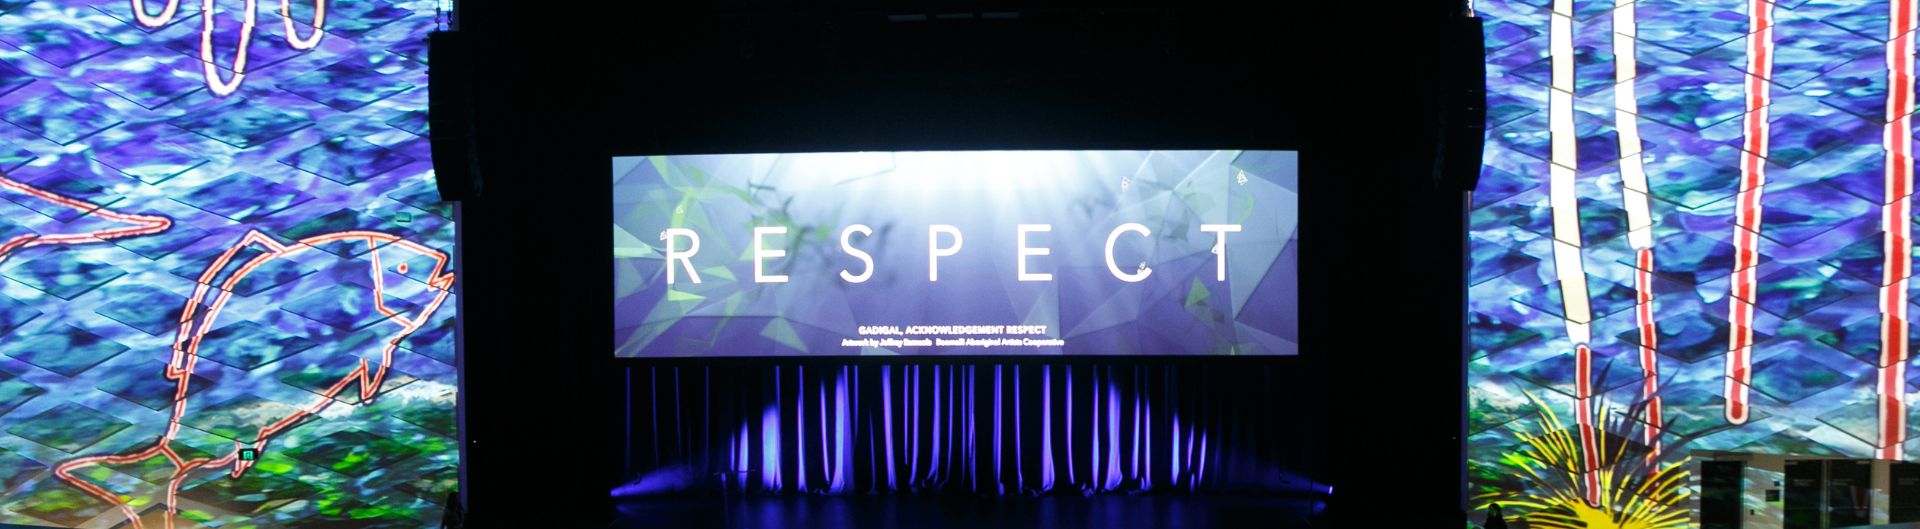 ICC Sydney's immersive audio visual projection in Darling Harbour Theatre.